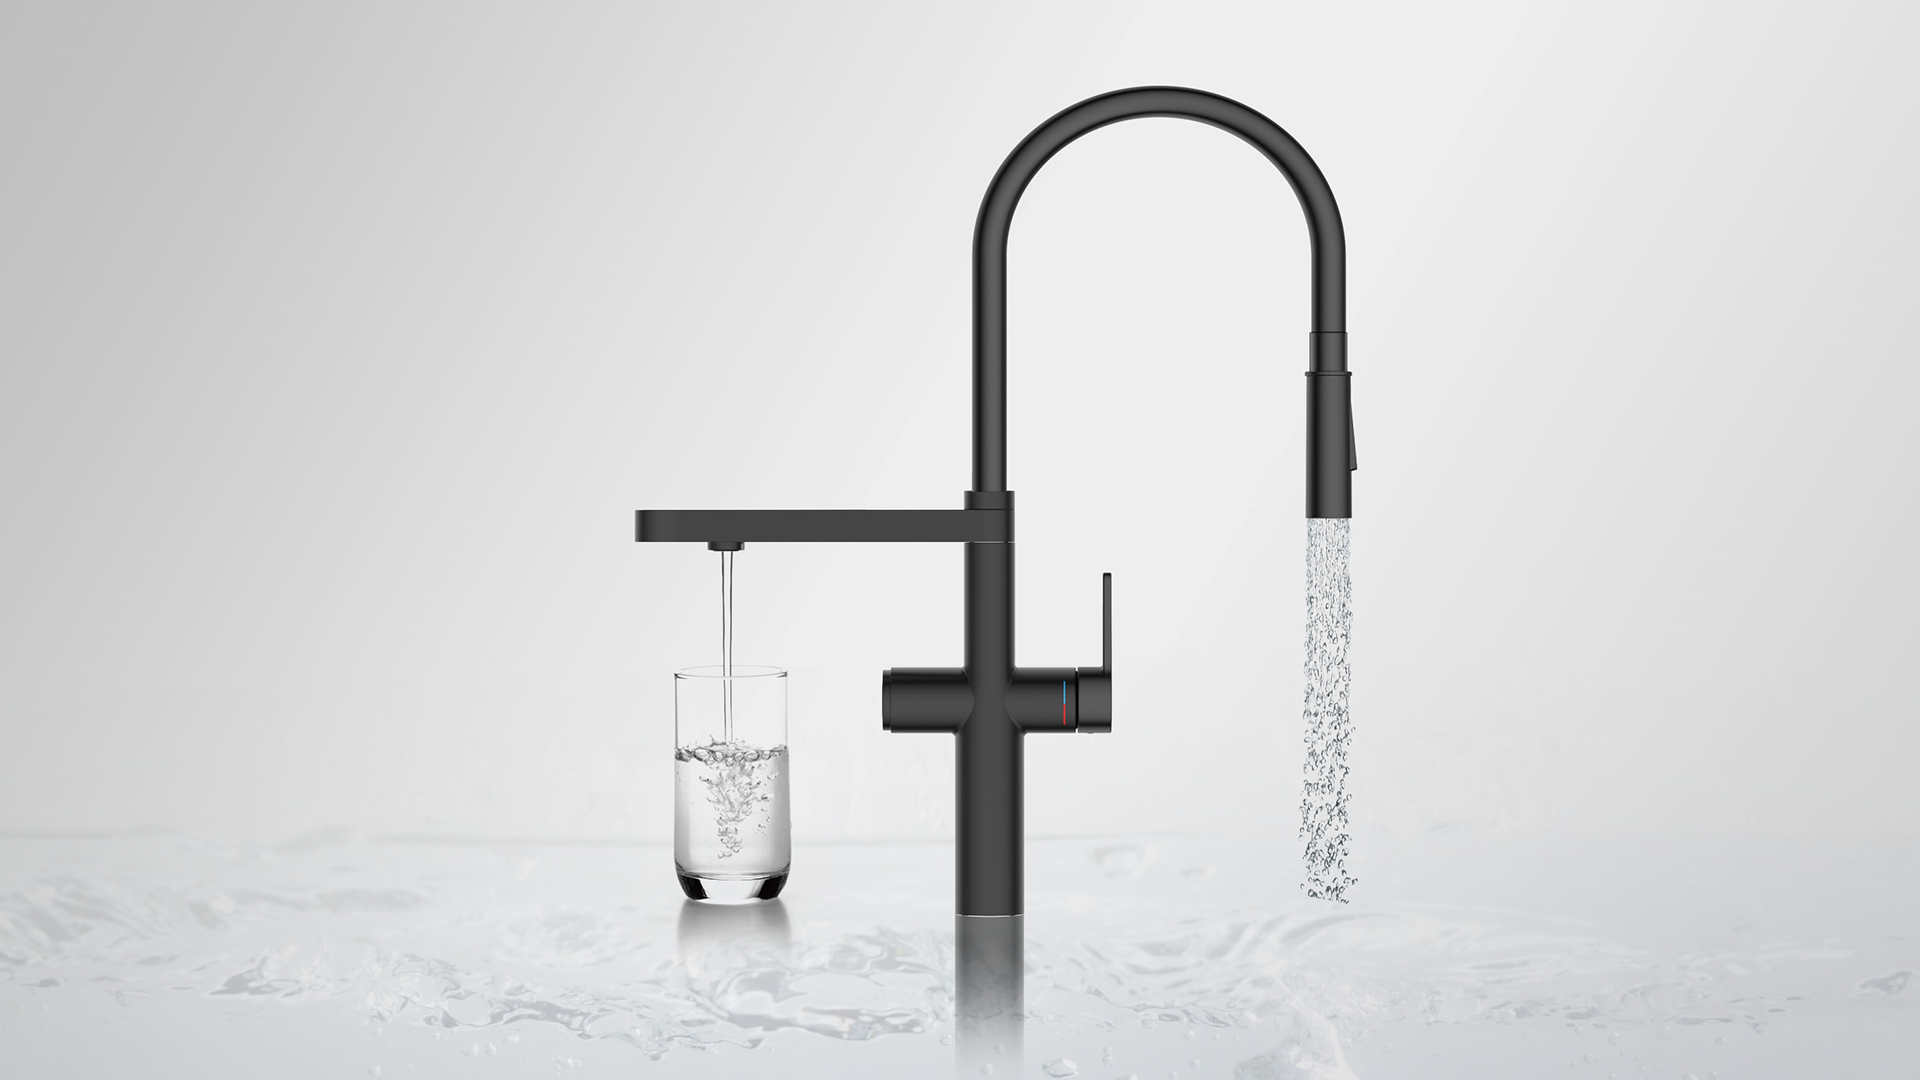 2In1 Kitchen Faucet with filter function